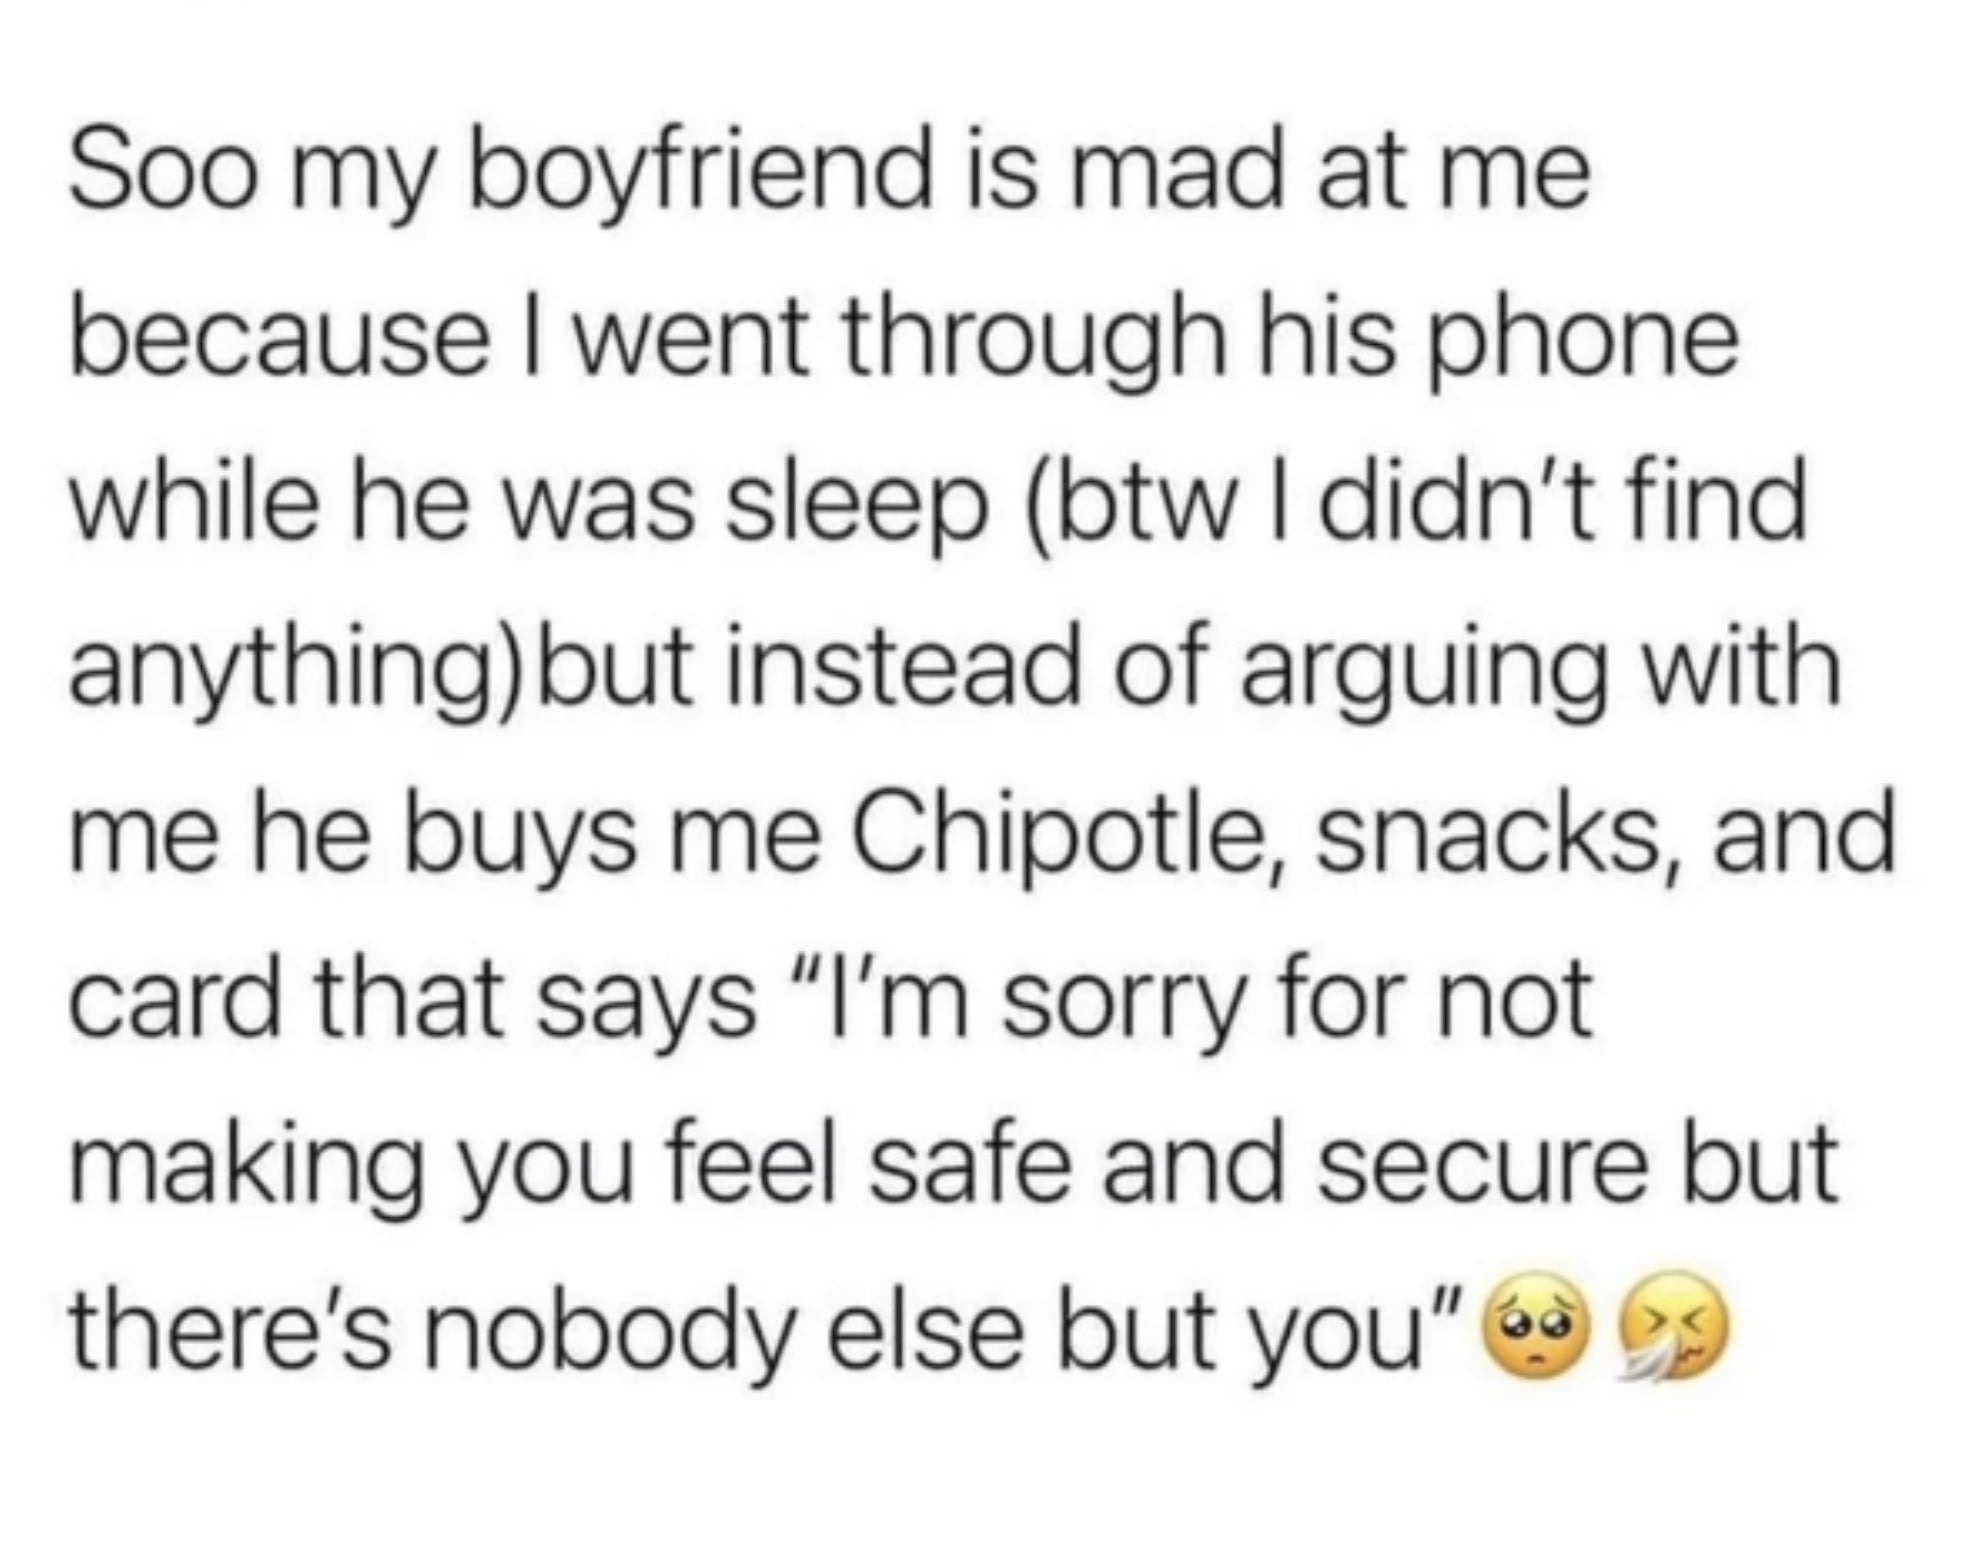 Her boyfriend was mad at her for going through his phone while he was asleep, but instead of arguing, he just bought her Chipotle, snacks, and a card saying &quot;I&#x27;m sorry for not making you feel safe and secure, but there&#x27;s nobody else but you&quot;